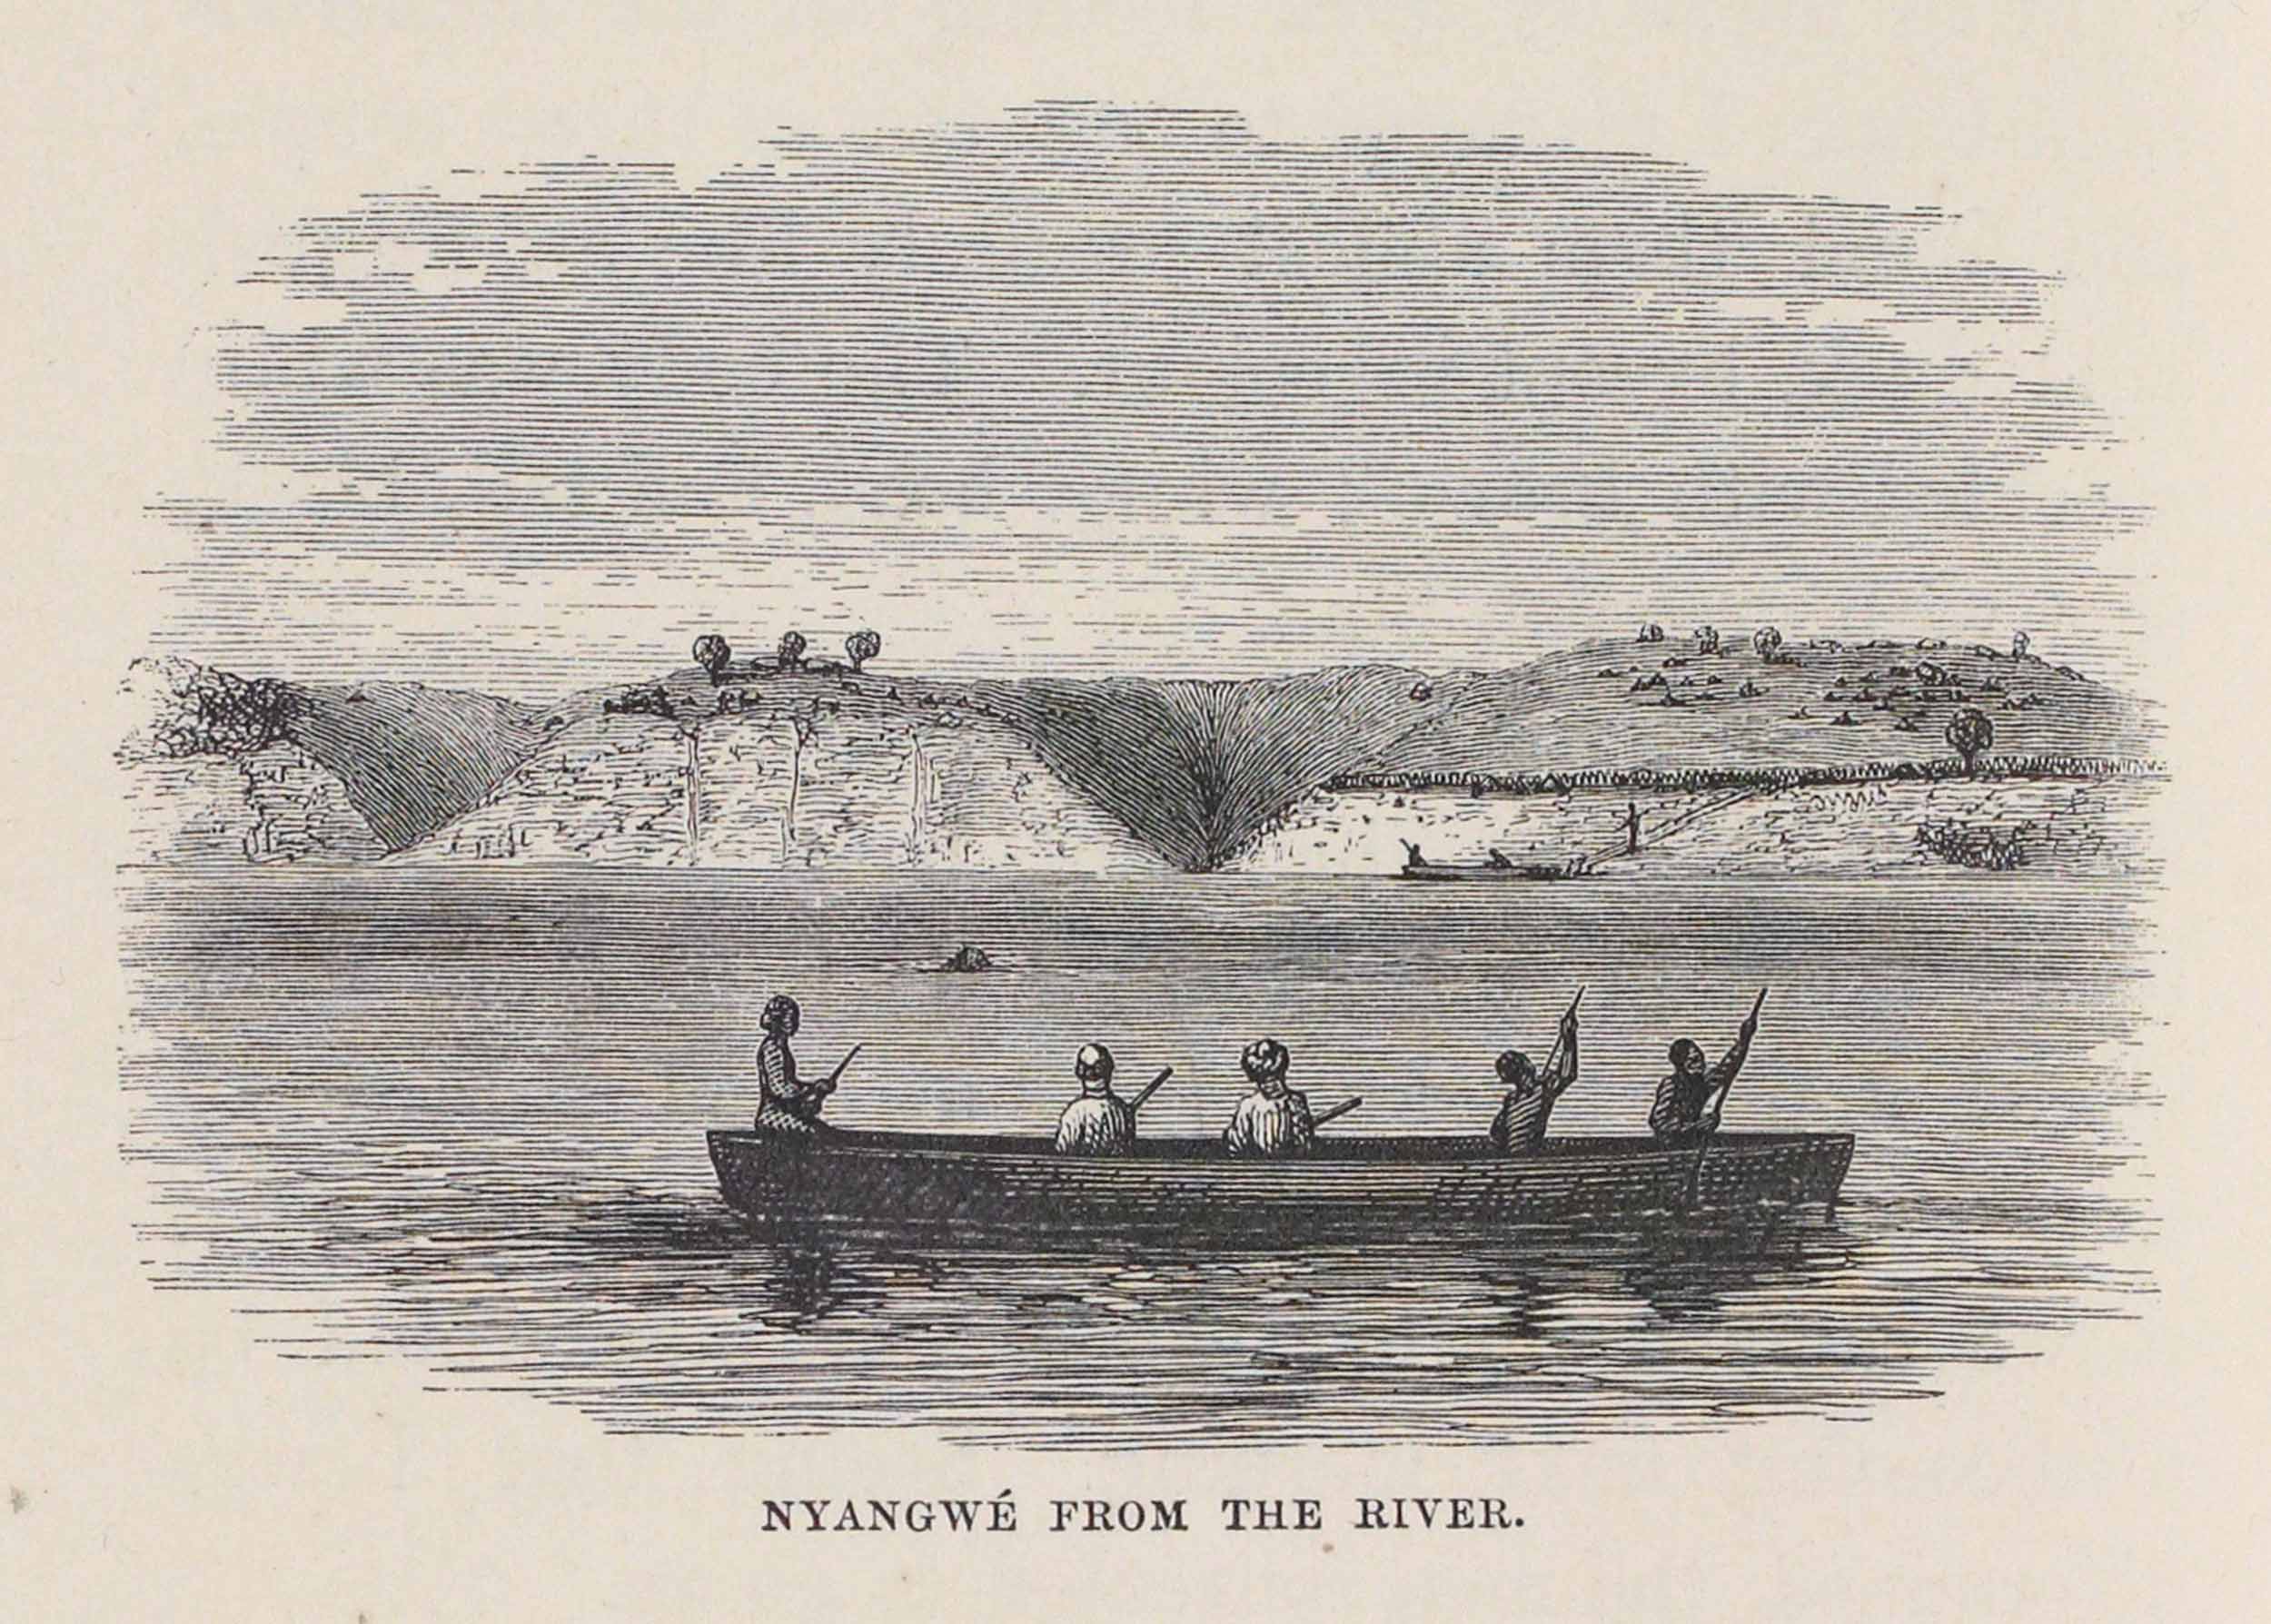 Nyangwe from the River from Verney Lovett Cameron's Across Africa (1877,1:378). Copyright National Library of Scotland. Creative Commons Share-alike 2.5 UK: Scotland (https://creativecommons.org/licenses/by-nc-sa/2.5/scotland/).